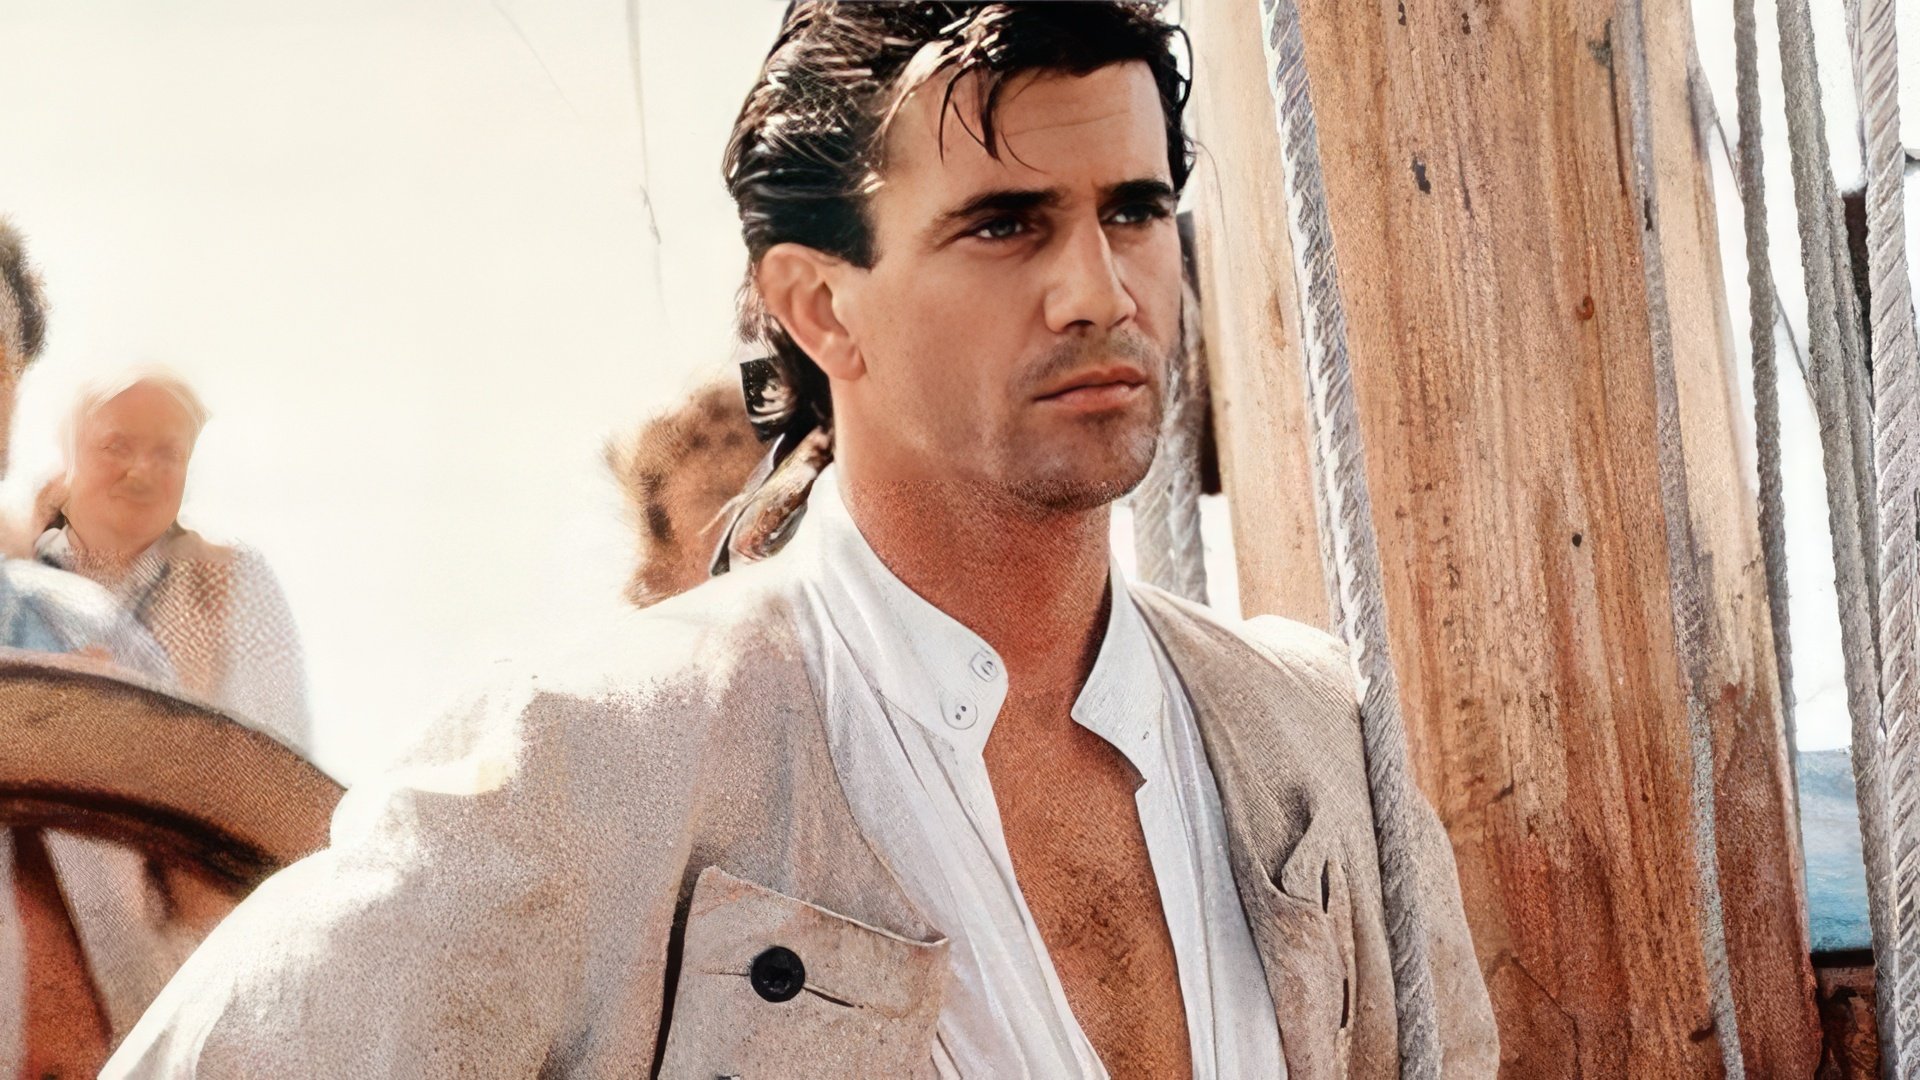 Mel Gibson in the film The Bounty